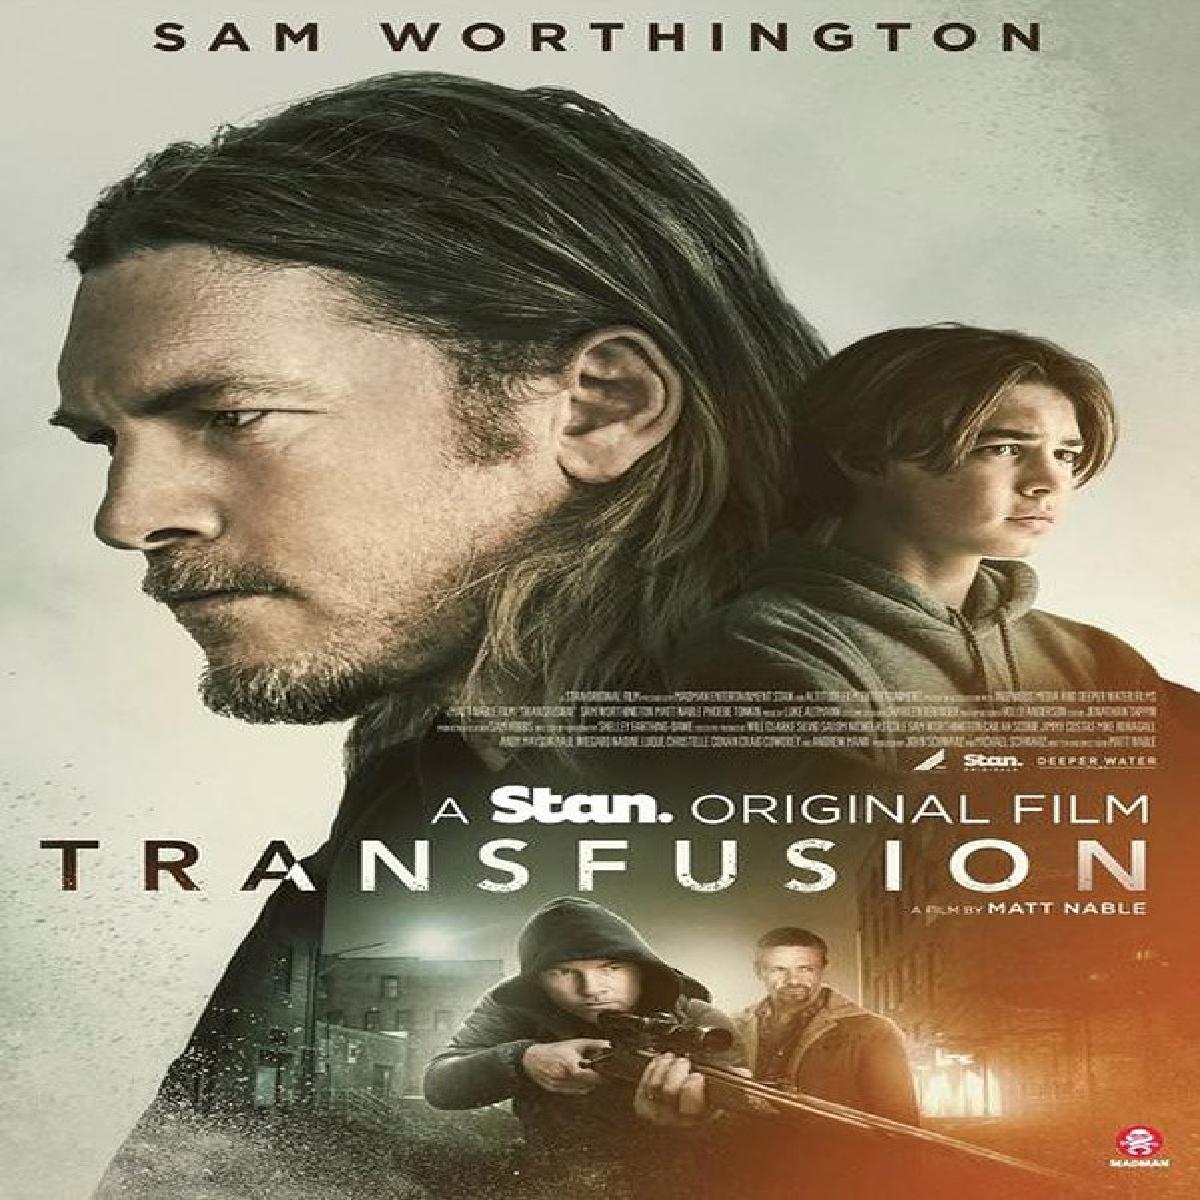 Transfusion Trailer Is Out, Starring Sam Worthington